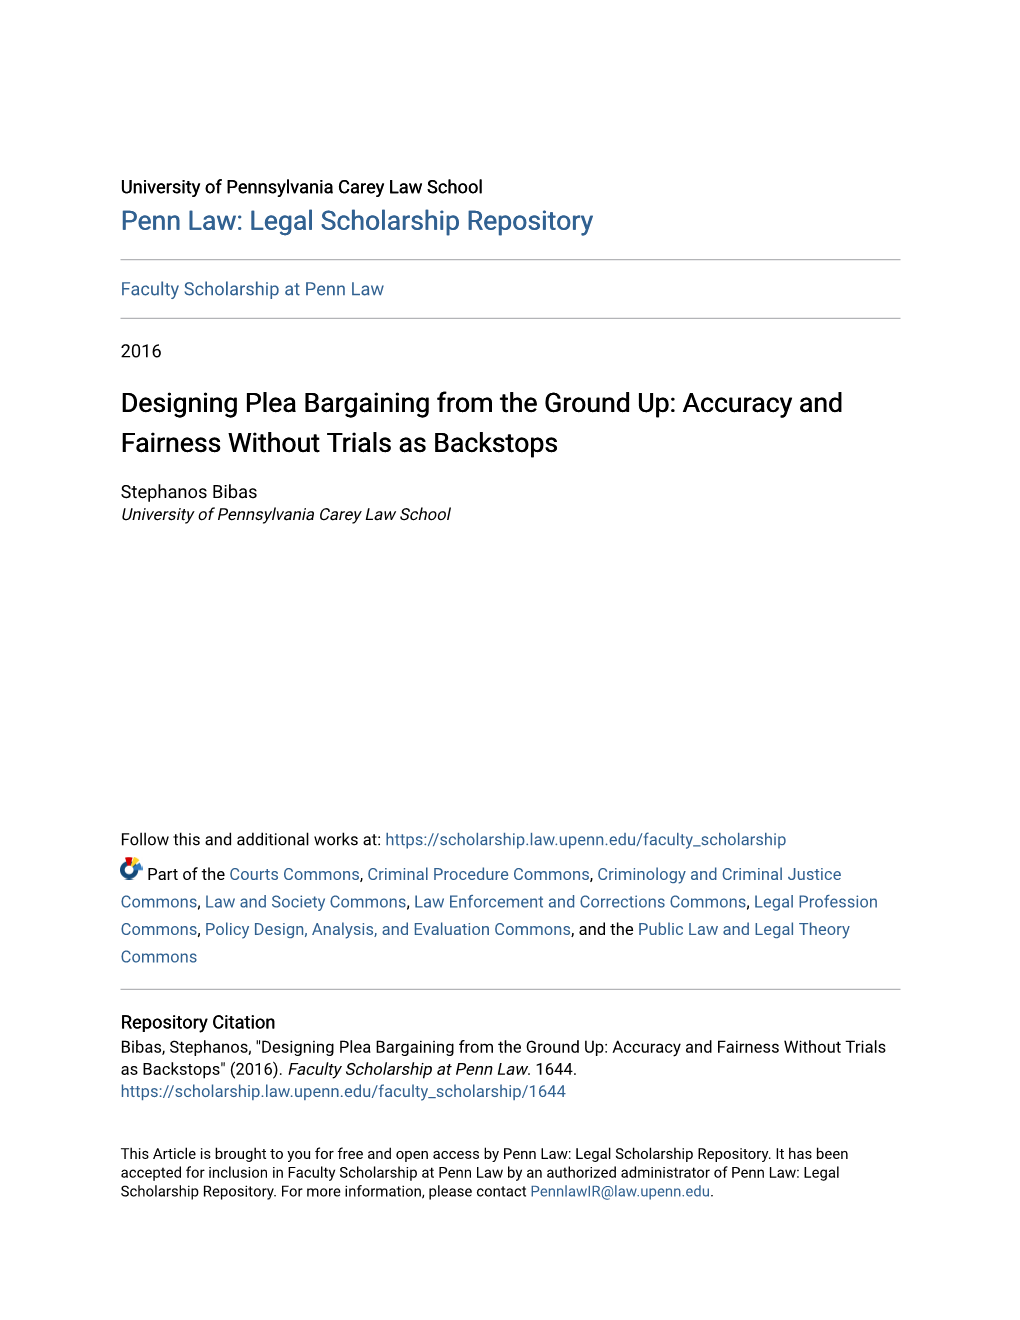 Designing Plea Bargaining from the Ground Up: Accuracy and Fairness Without Trials As Backstops